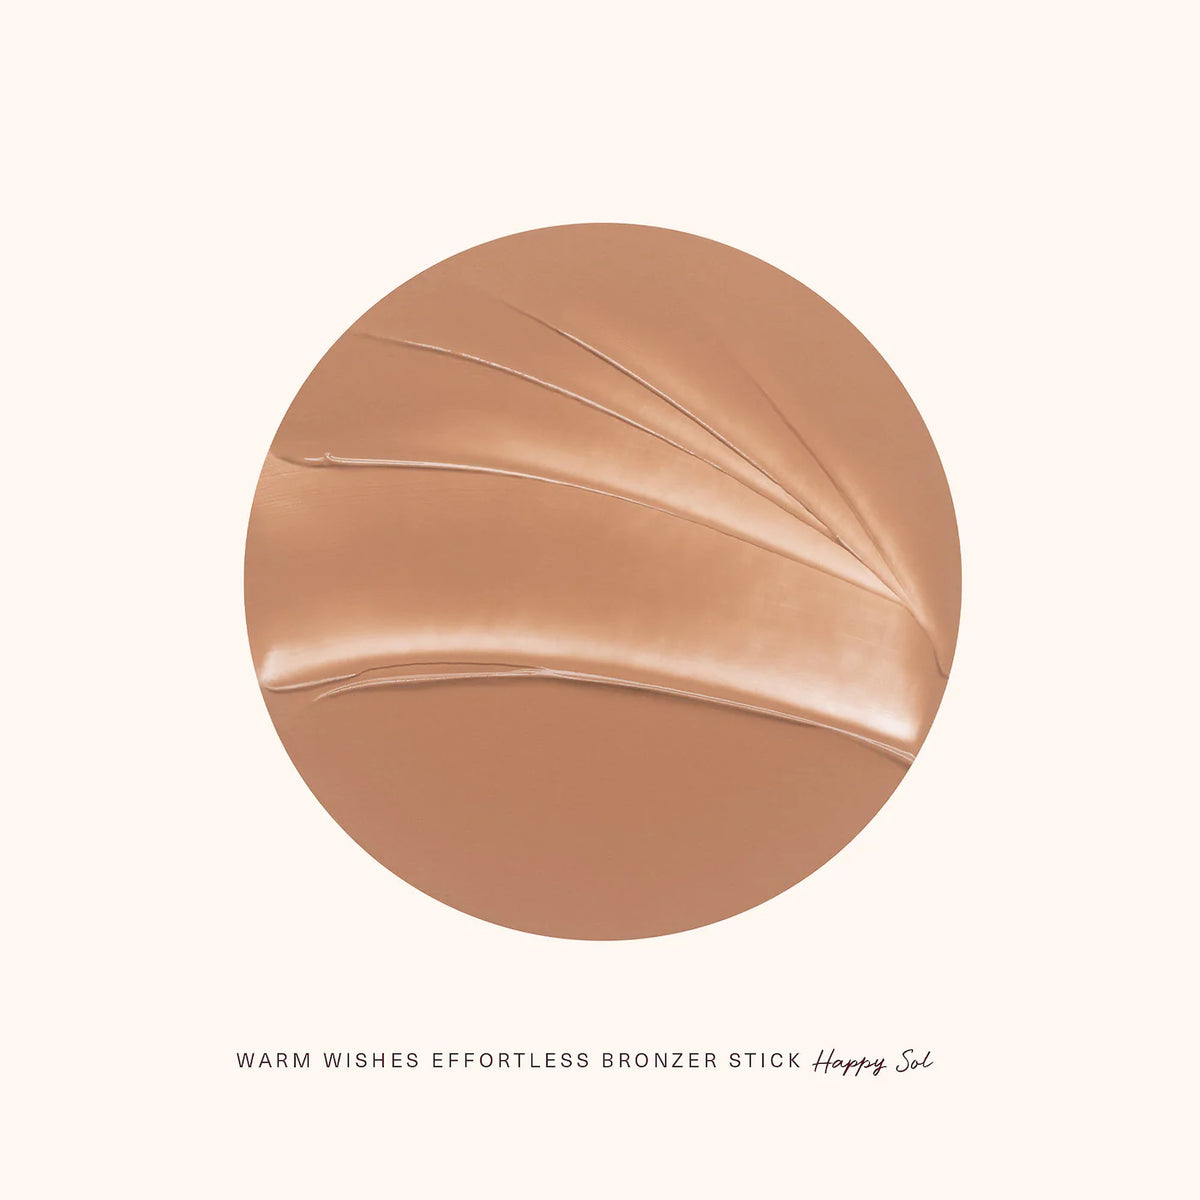 Rare Beauty by Selena Gomez Warm Wishes Effortless Bronzer Sticks  Volare Makeup Happy Sol - light brown with cool undertones  